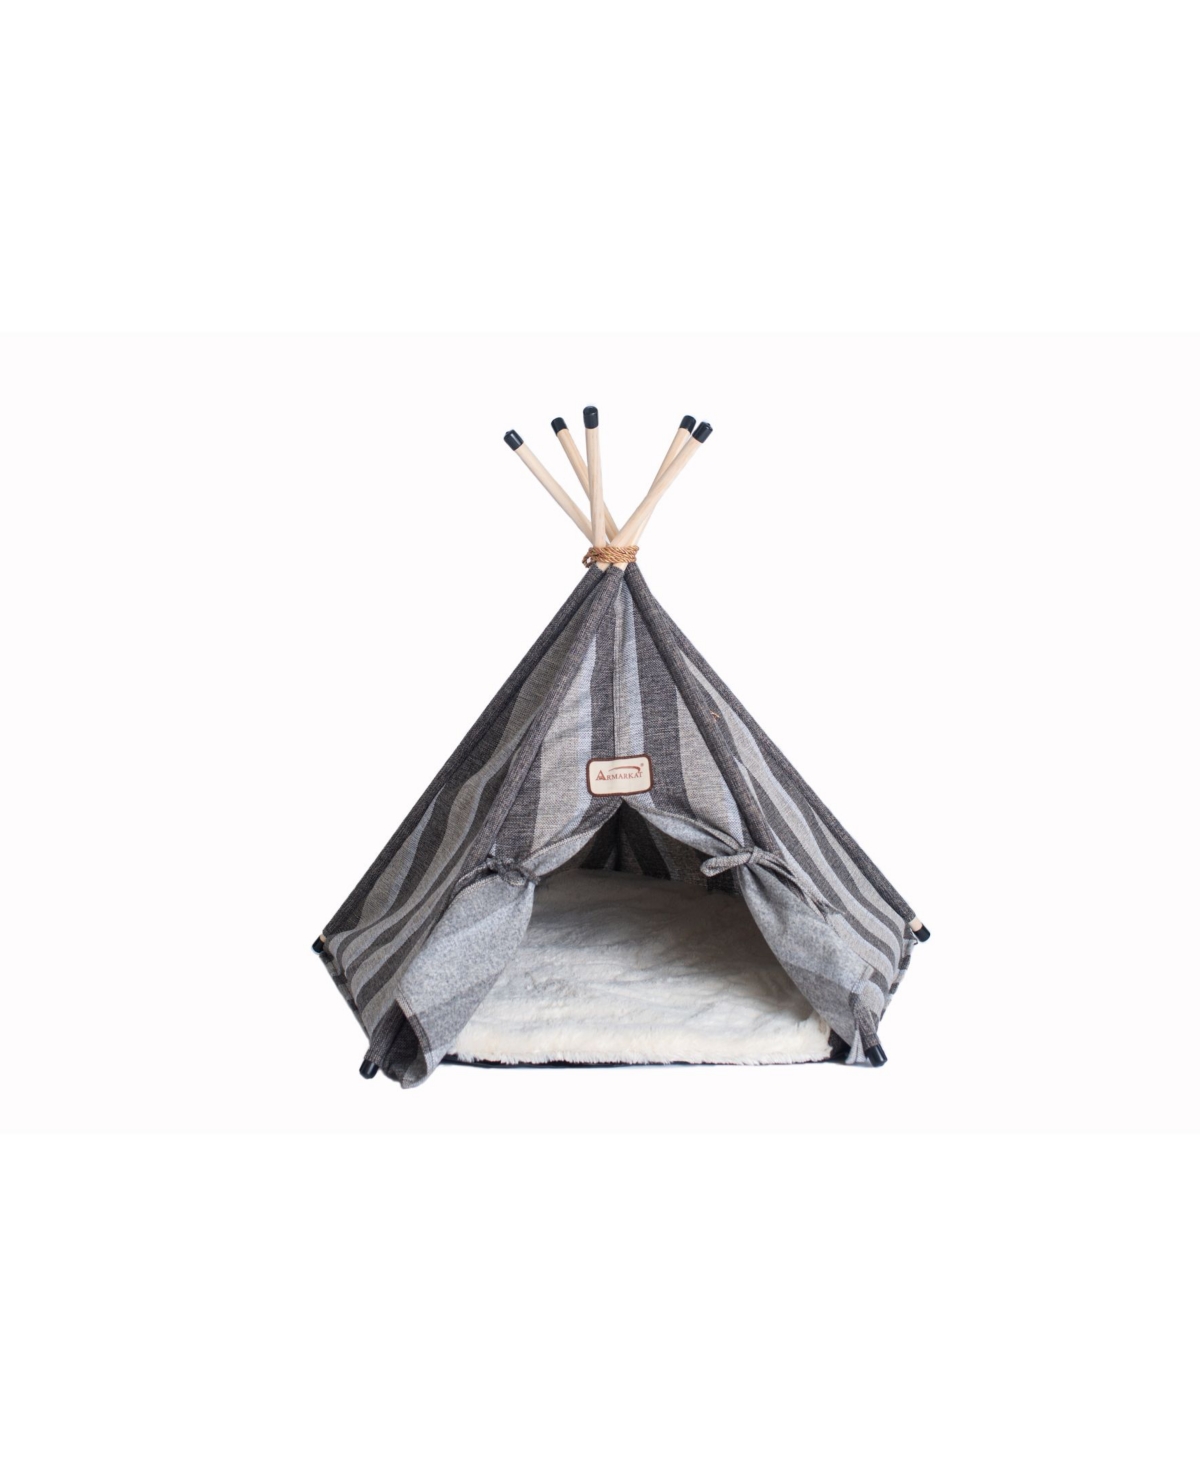 Cat Bed Teepee Style with Striped Pattern - Gray